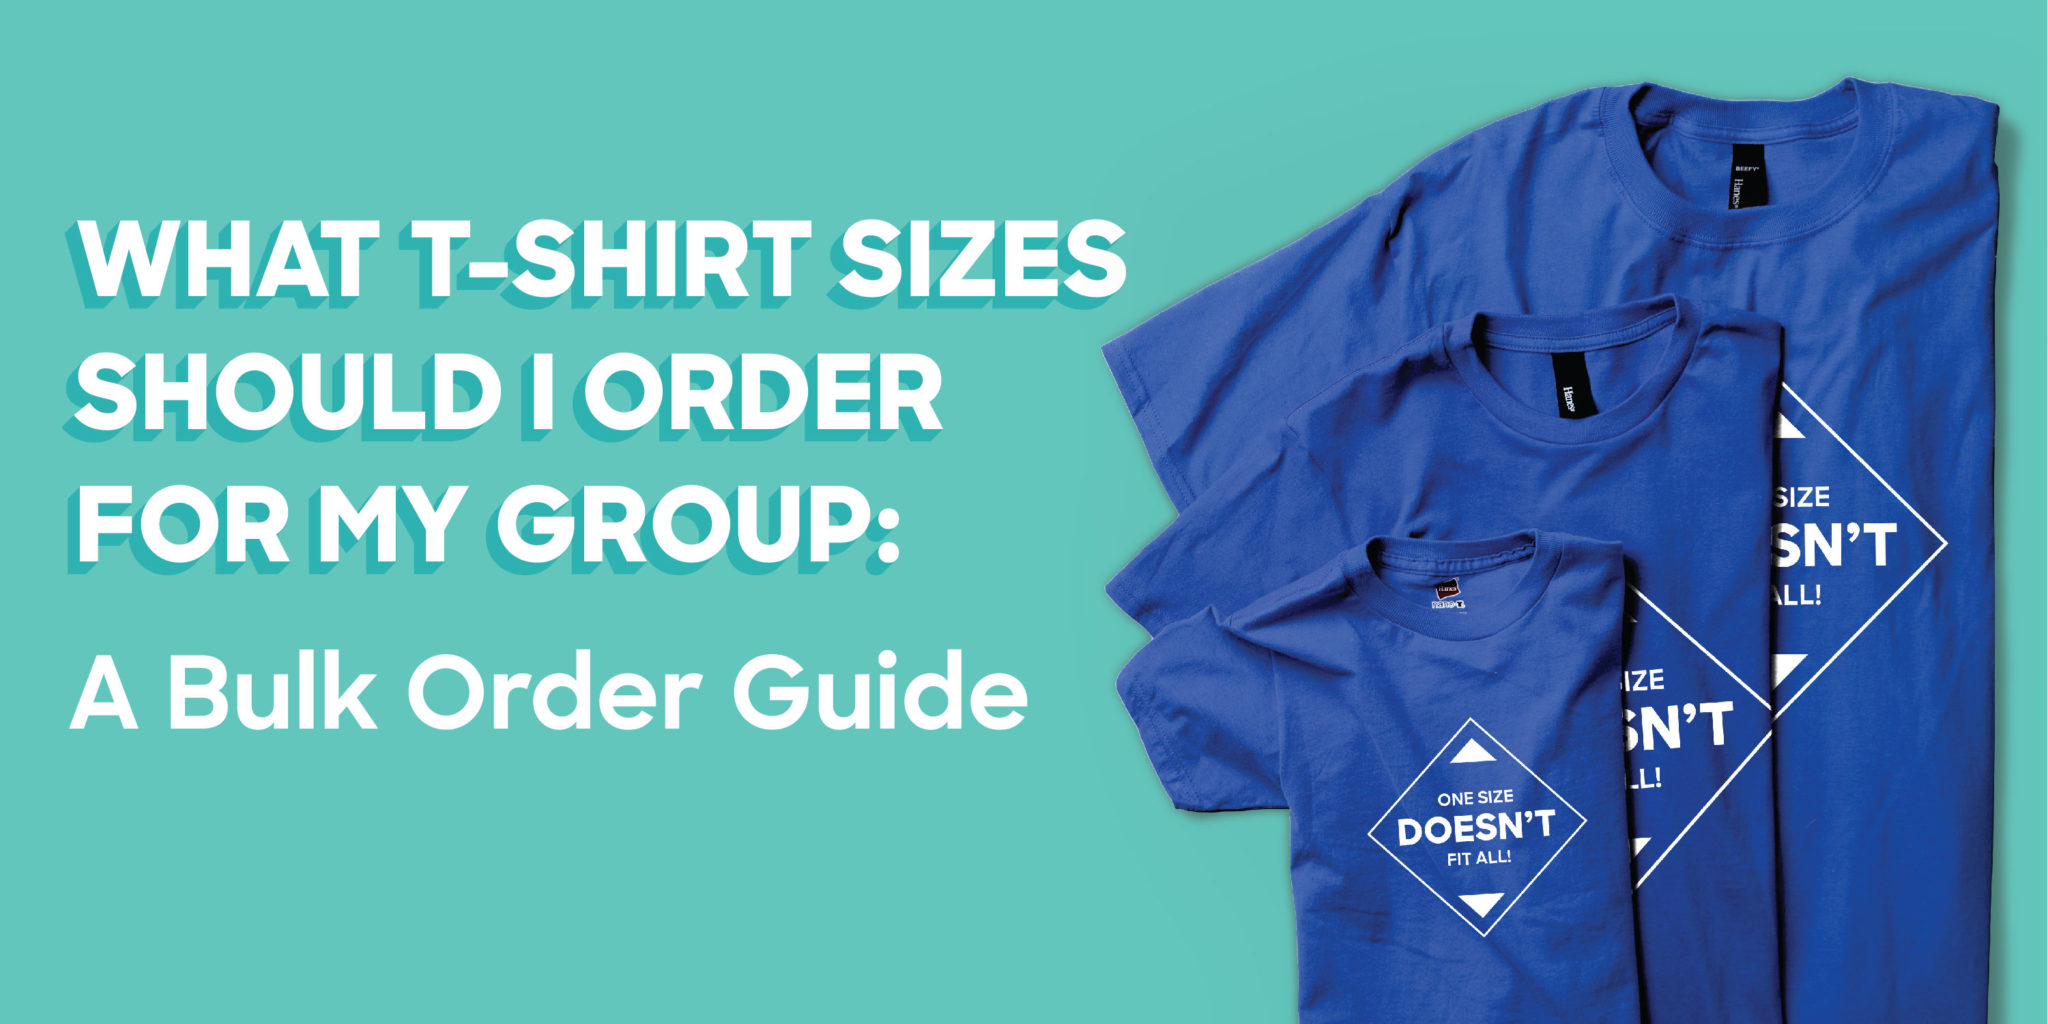 Pessimistisch diamant Productiviteit What T-shirt Sizes Should I Order for My Group: A Bulk Order Guide - Custom  Ink